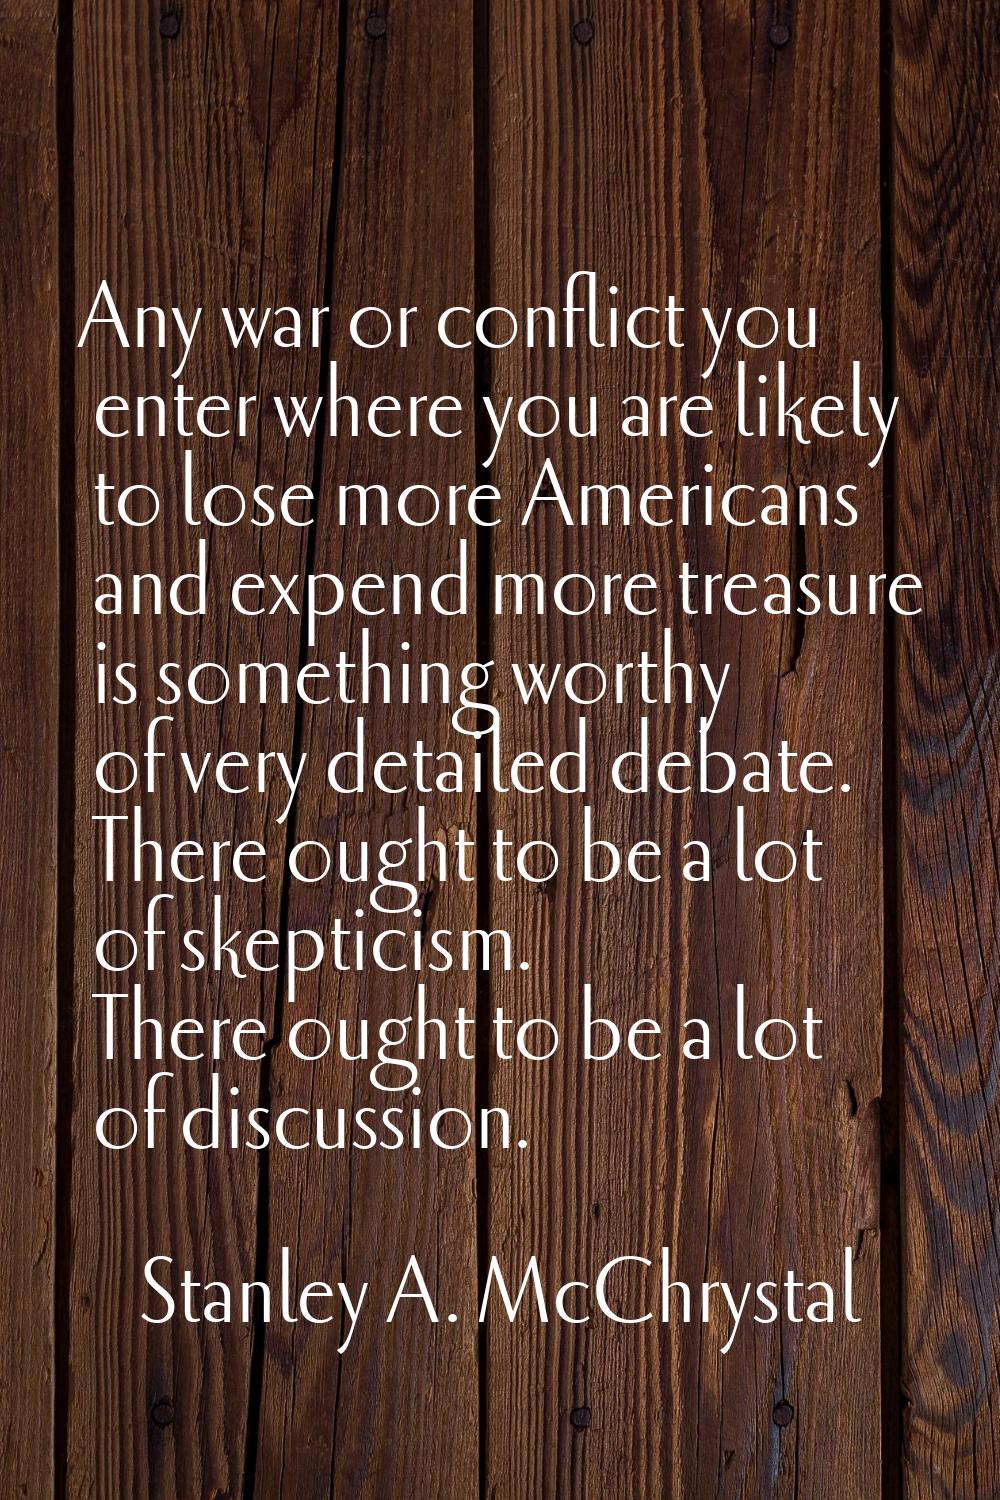 Any war or conflict you enter where you are likely to lose more Americans and expend more treasure 